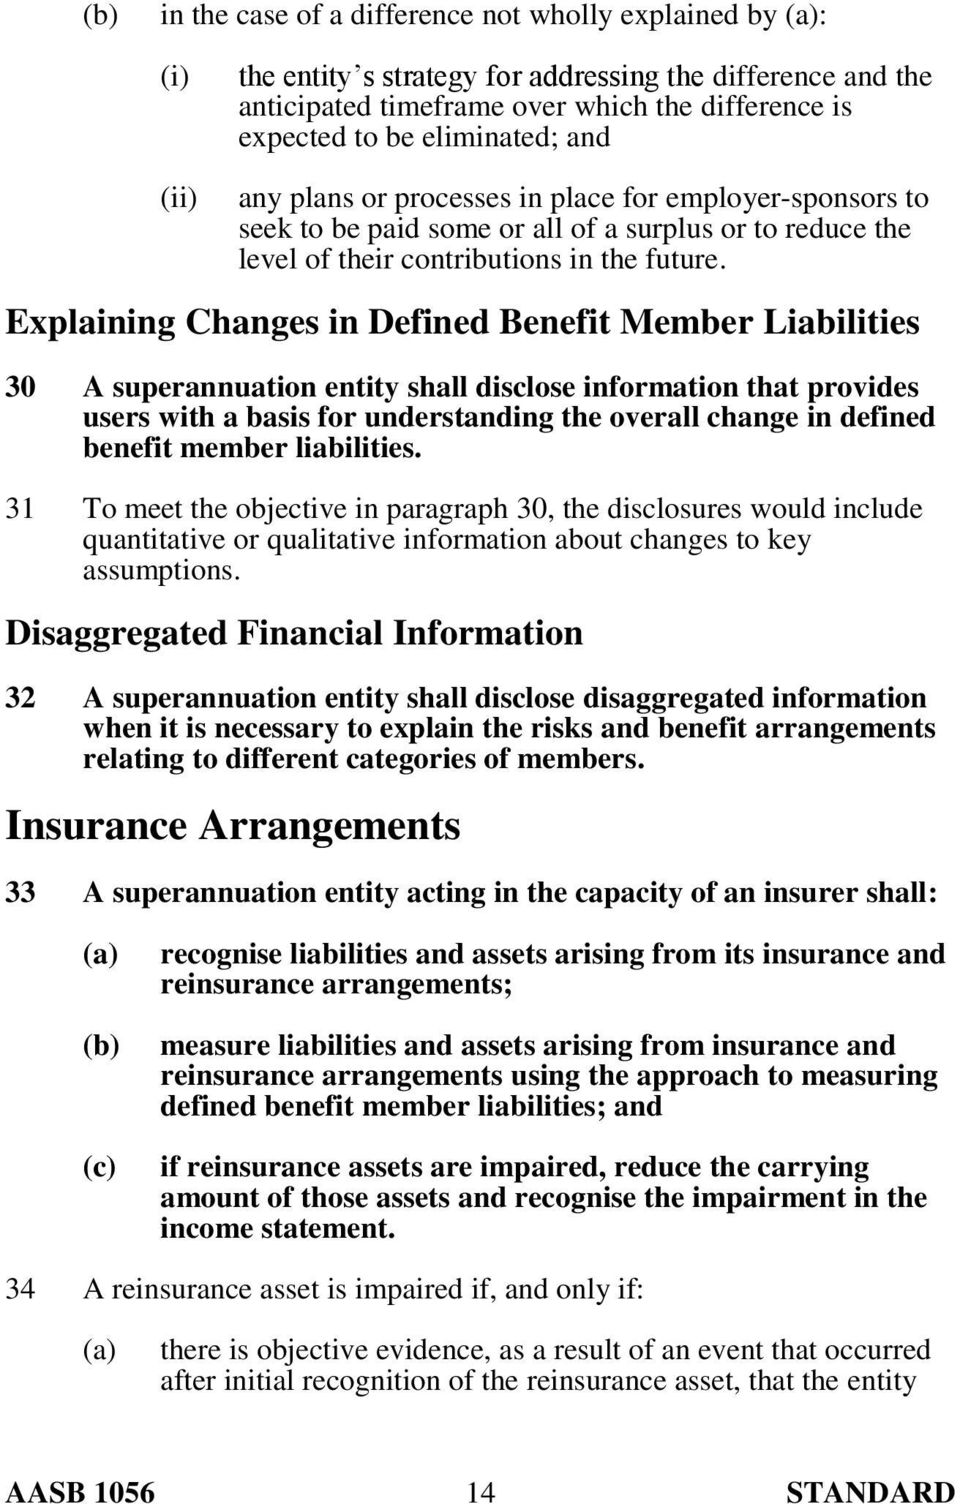 Explaining Changes in Defined Benefit Member Liabilities 30 A superannuation entity shall disclose information that provides users with a basis for understanding the overall change in defined benefit